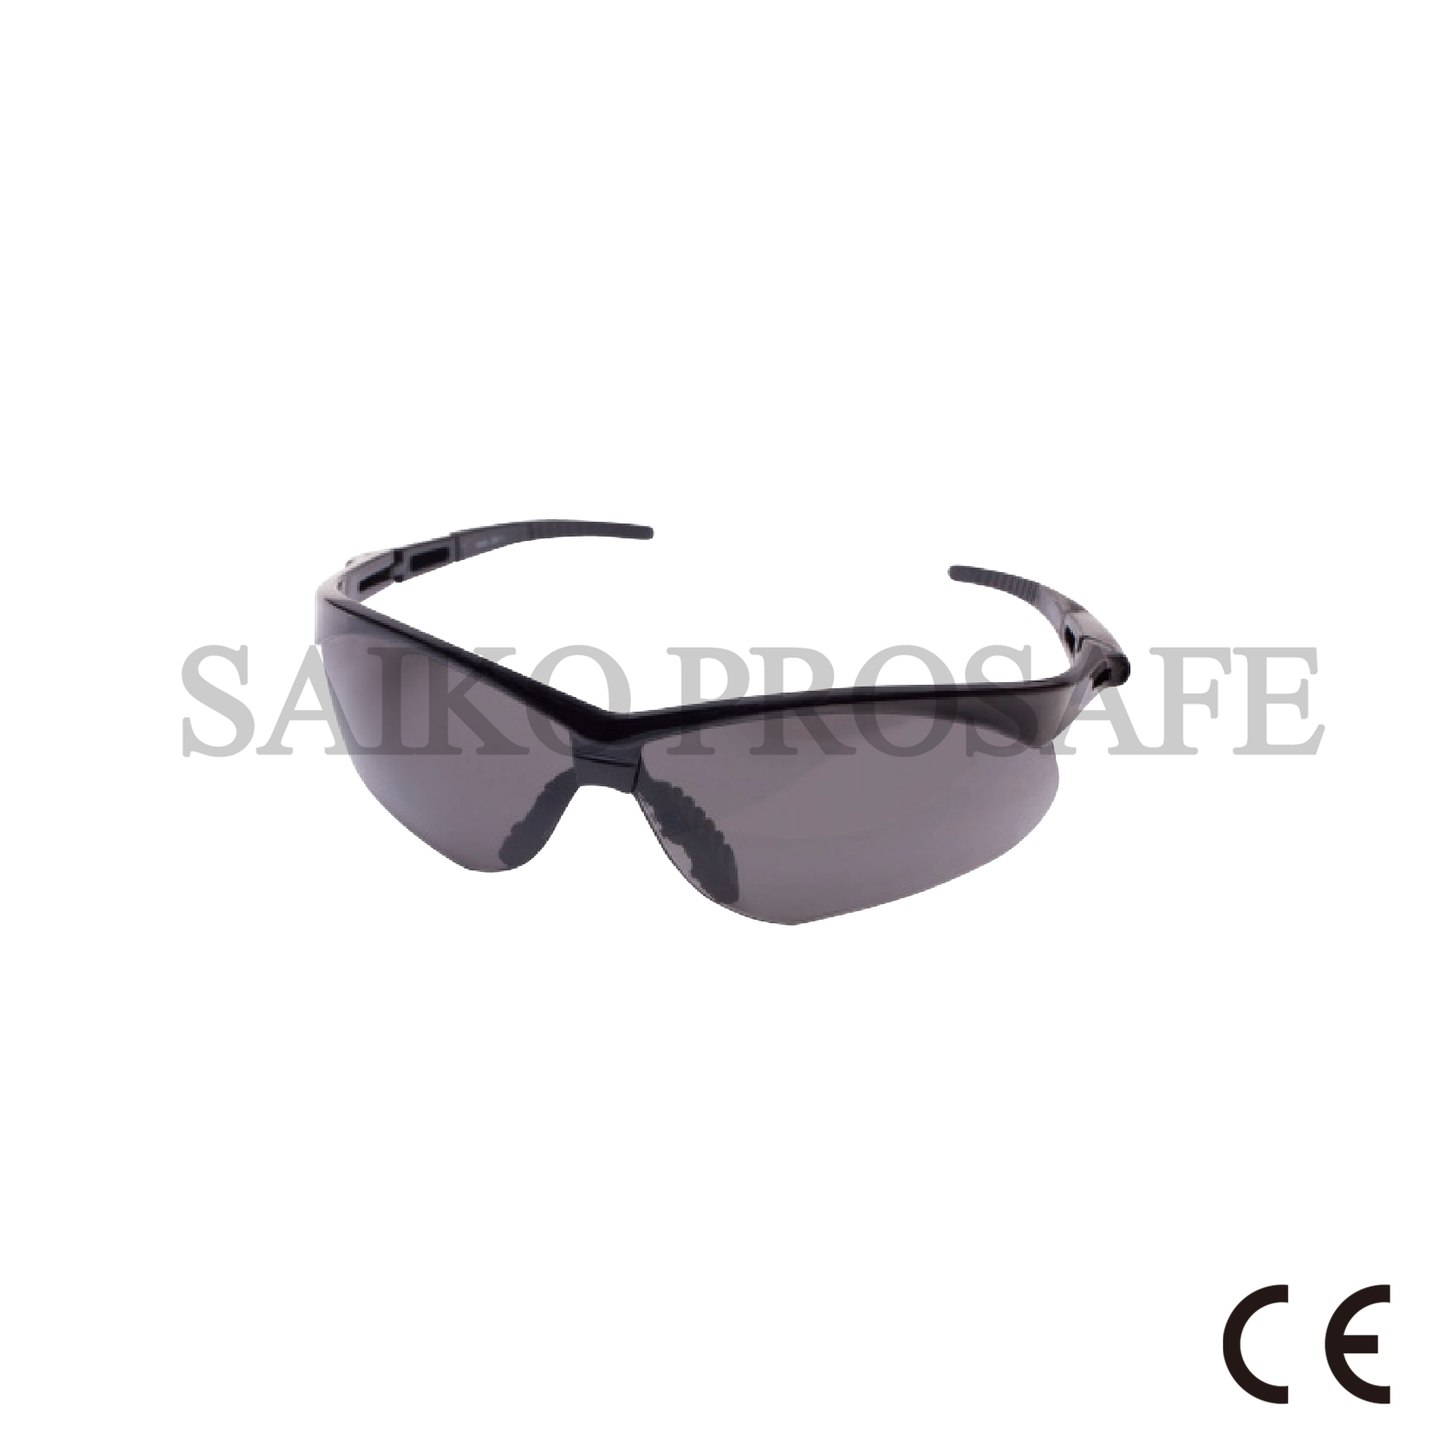 Safety spectacles safety glasses KM1502065